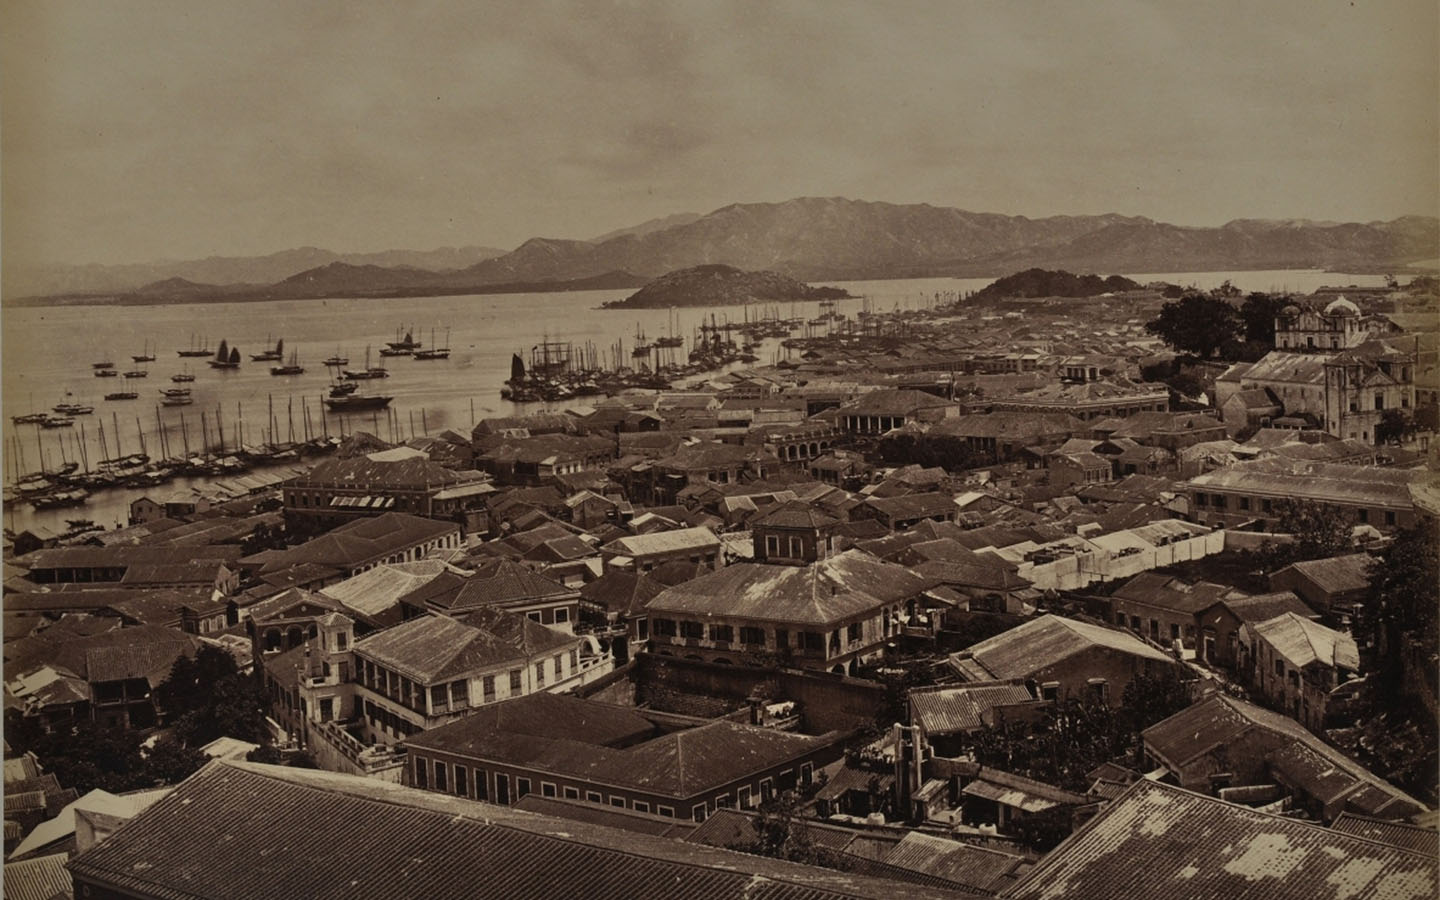 The Macao Museum is holding an exhibition of historical photographs